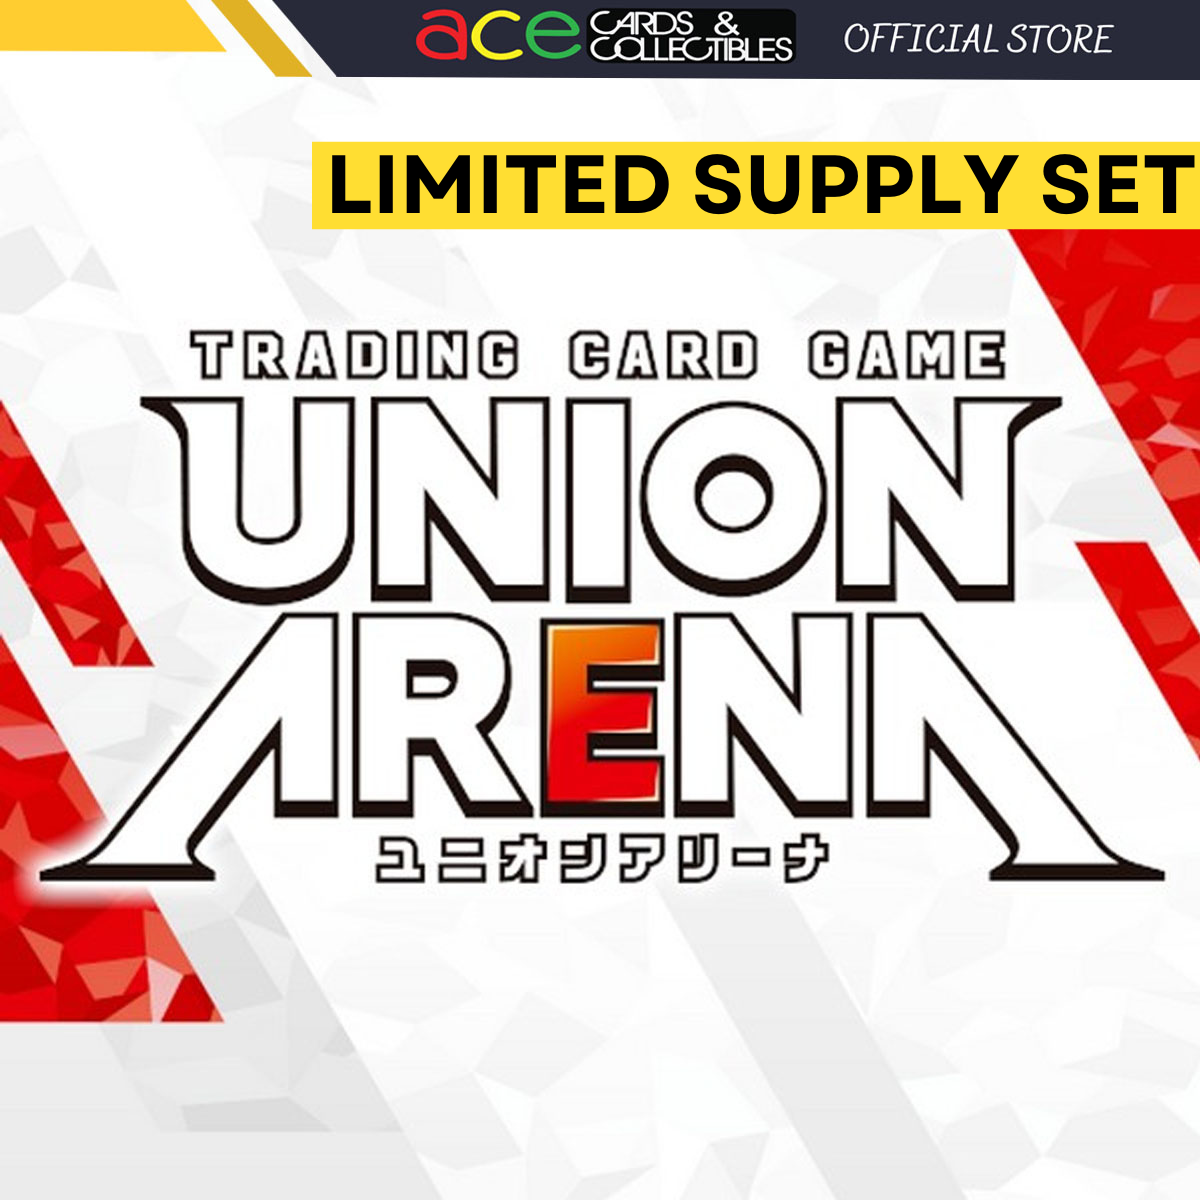 Union Arena Limited Supply Set-Code Geass-Bandai-Ace Cards & Collectibles